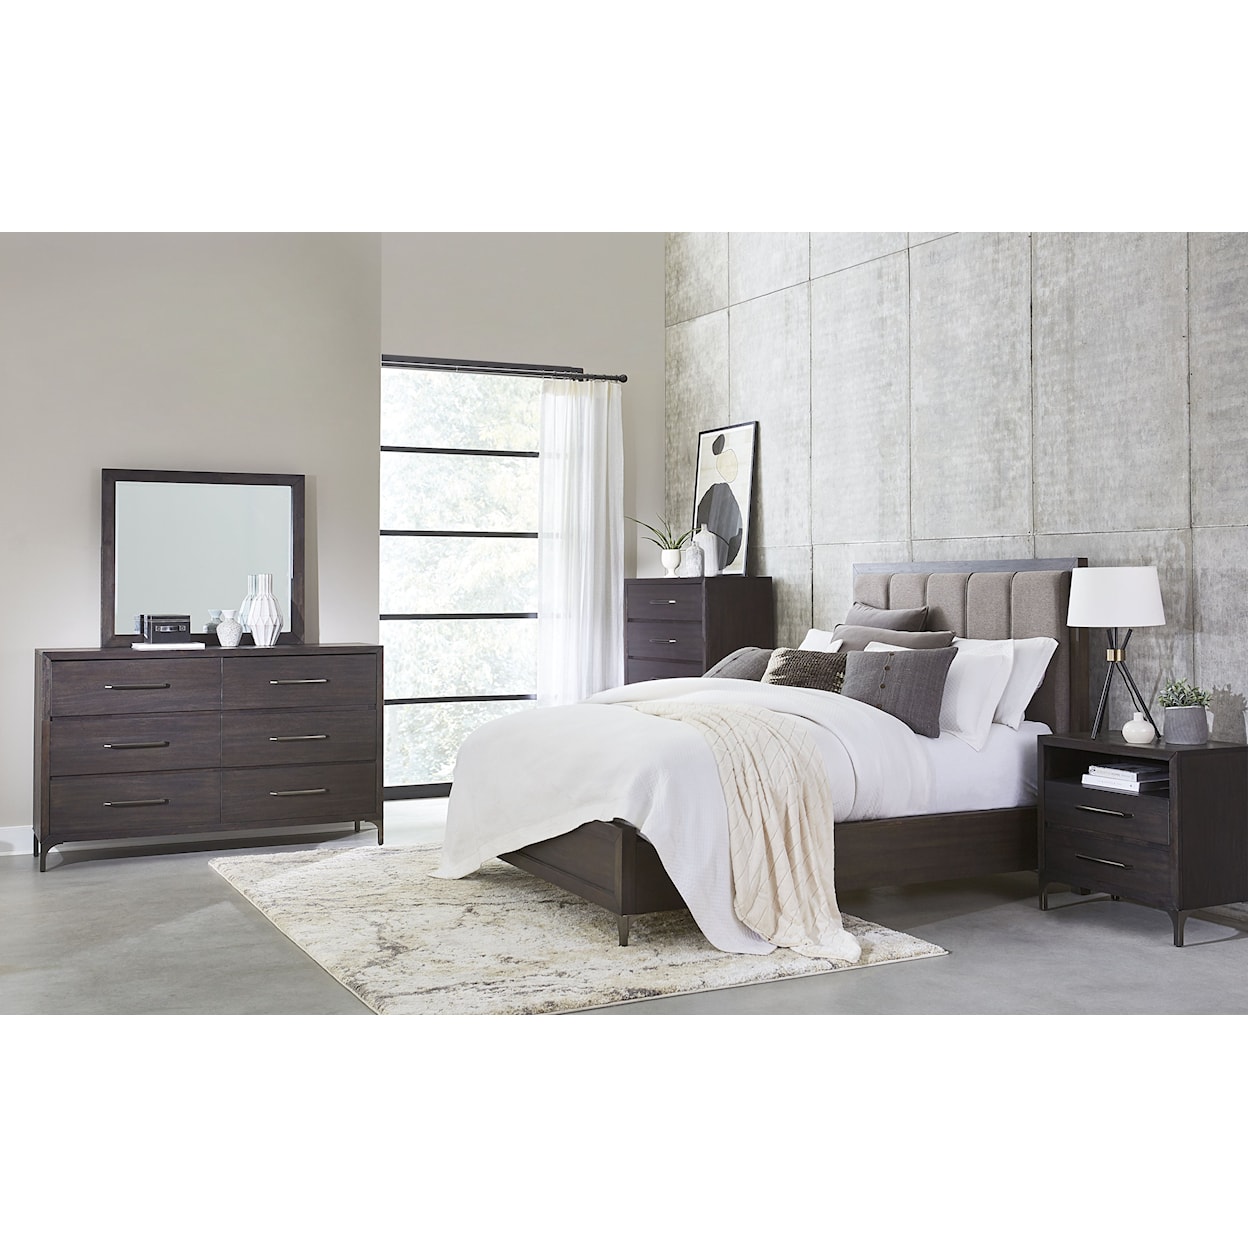 Modus International Lucerne California King Panel Bed in Vintage Coffee